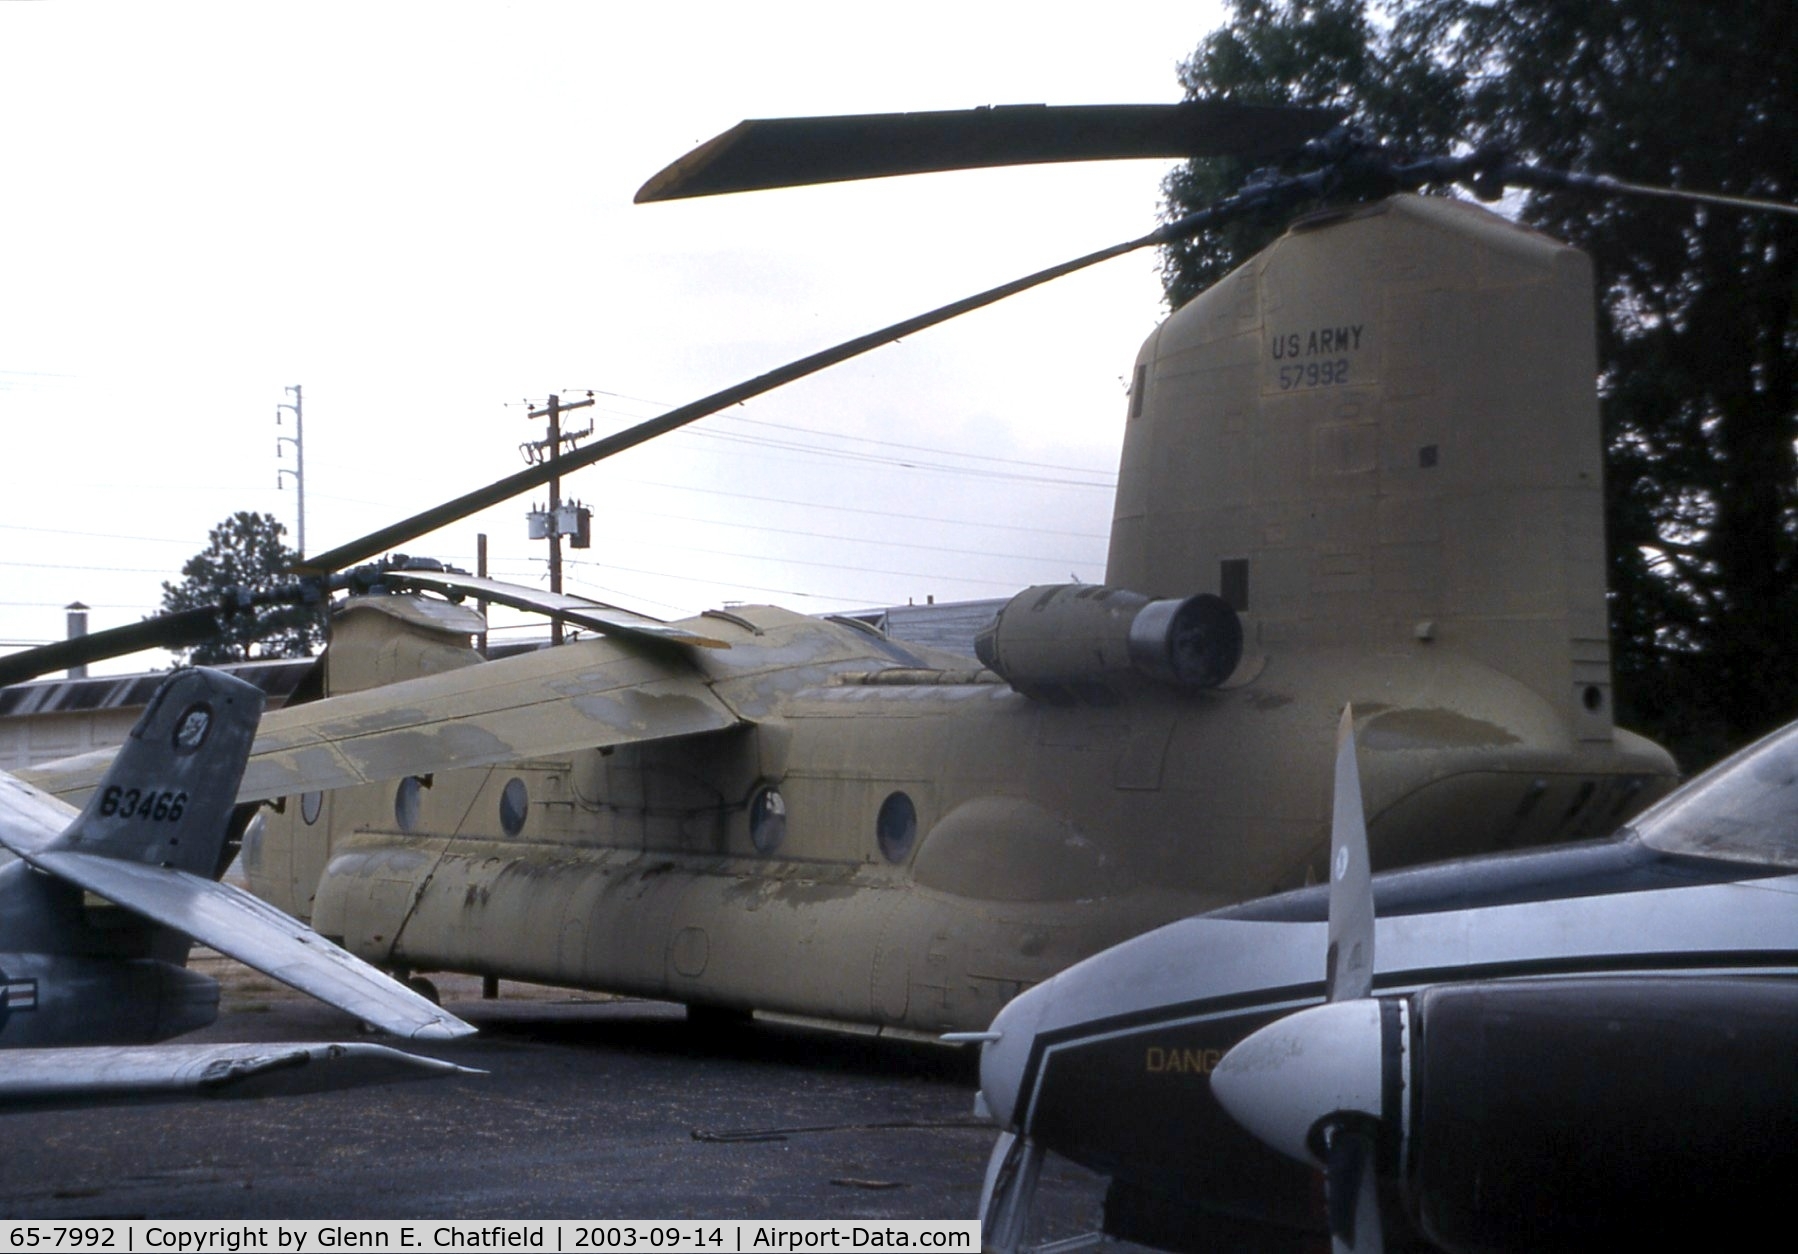 65-7992, 1965 Boeing Vertol CH-47A Chinook C/N B.164, CH-47A at the Army Aviation Museum.  It was modified as protoype BV-347 by stretching the cabin, retractable gear, 4-blade rotors, and wing